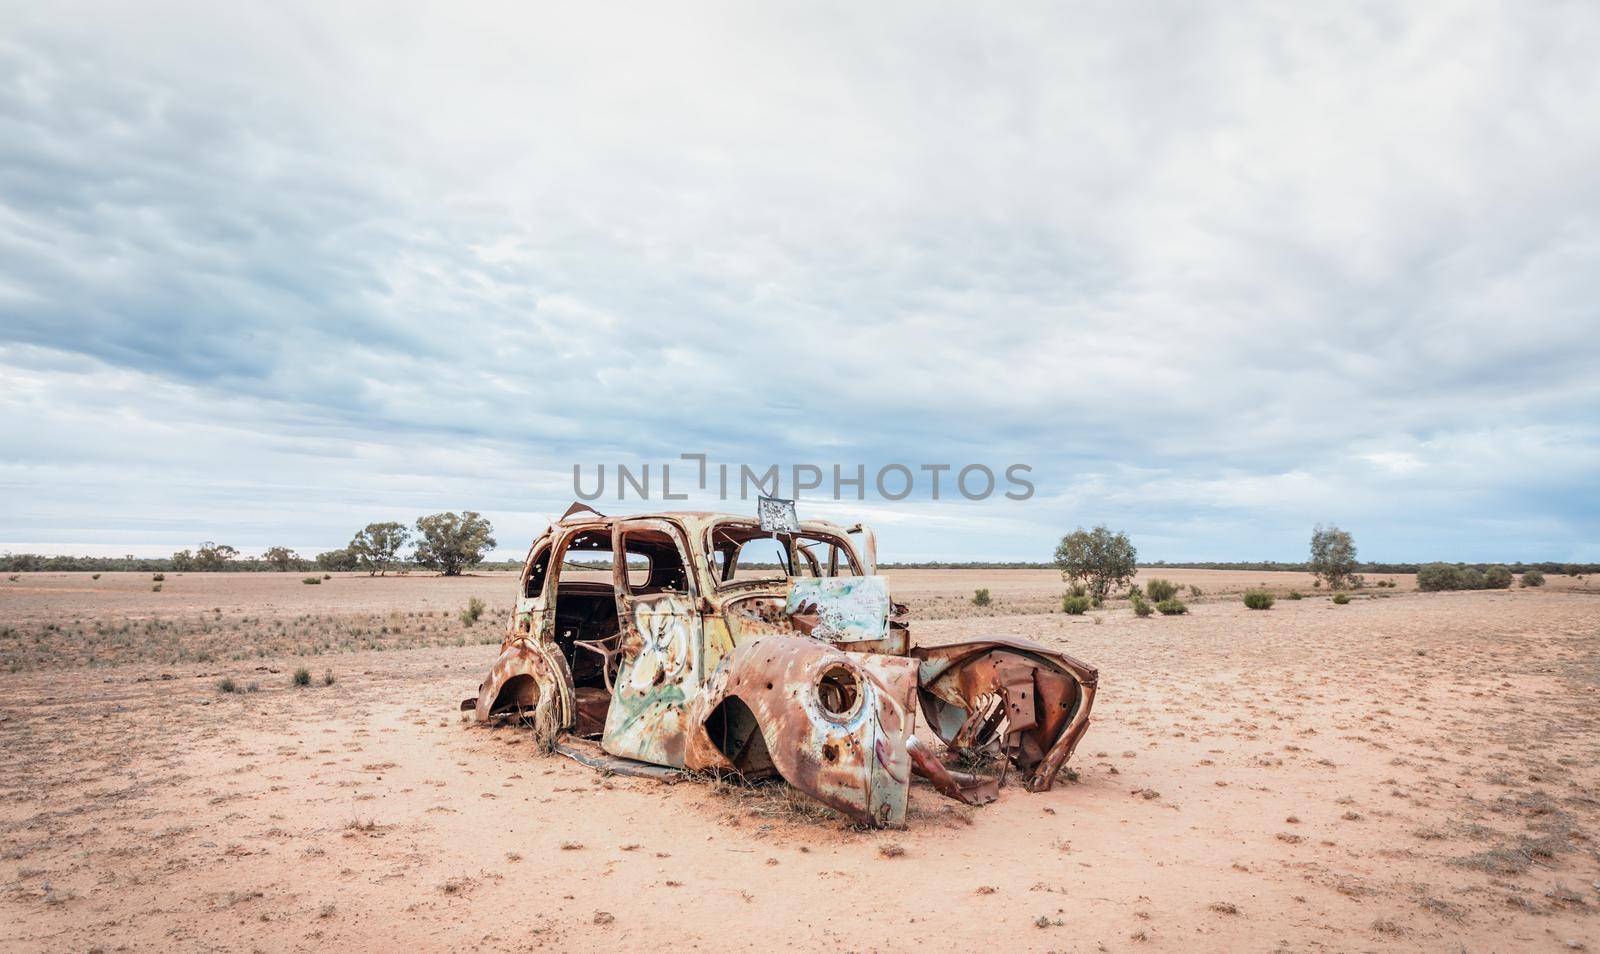 Rusting old car sits in barren dusty earth in outback Australia